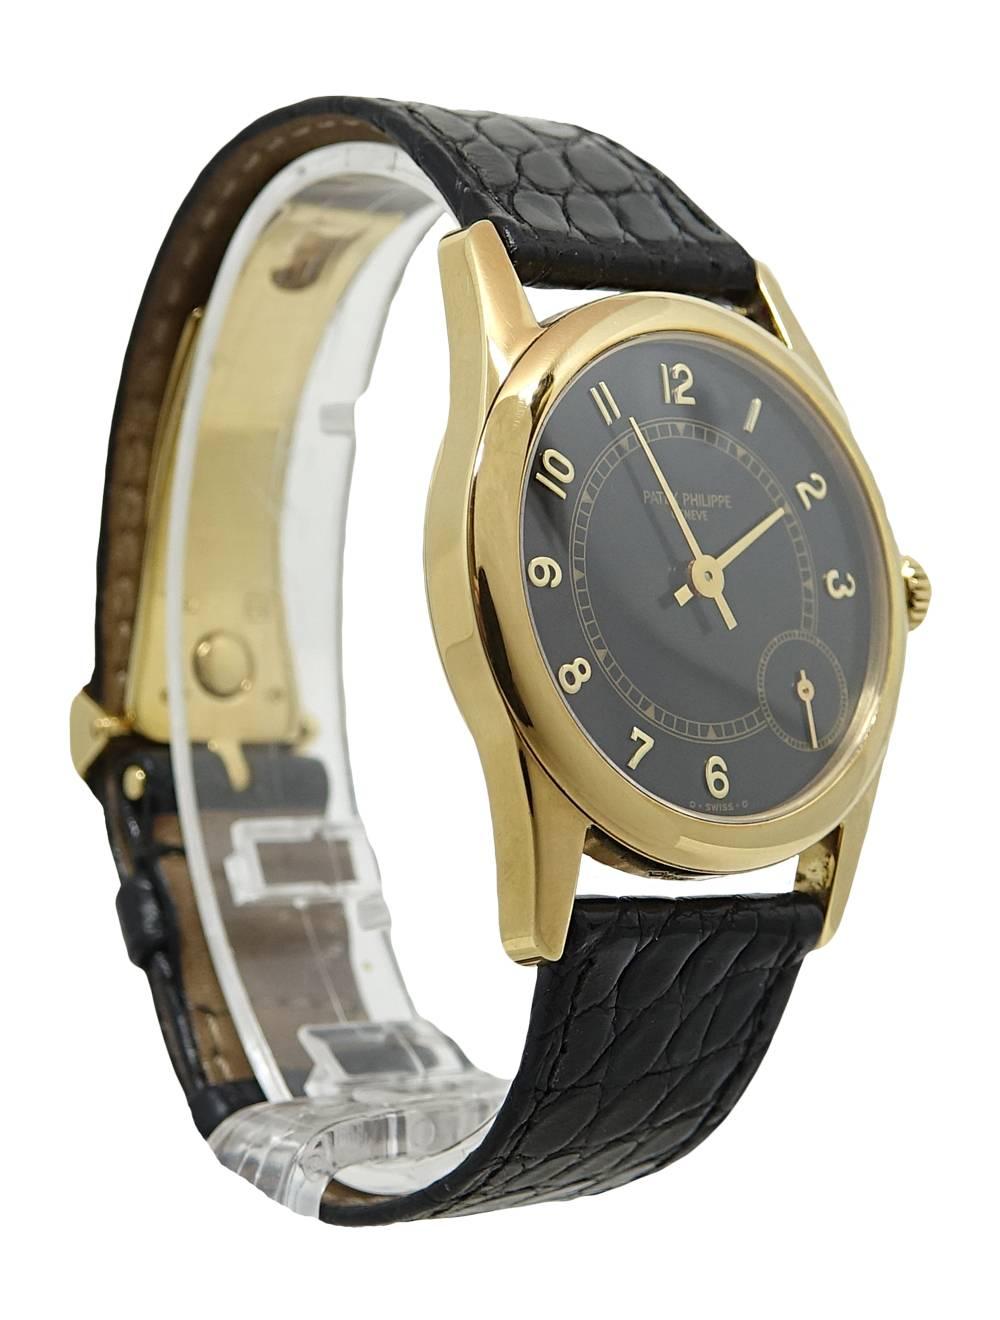 Patek Philippe Calatrava 5000-J Yellow Gold Watch In Excellent Condition For Sale In Naples, FL